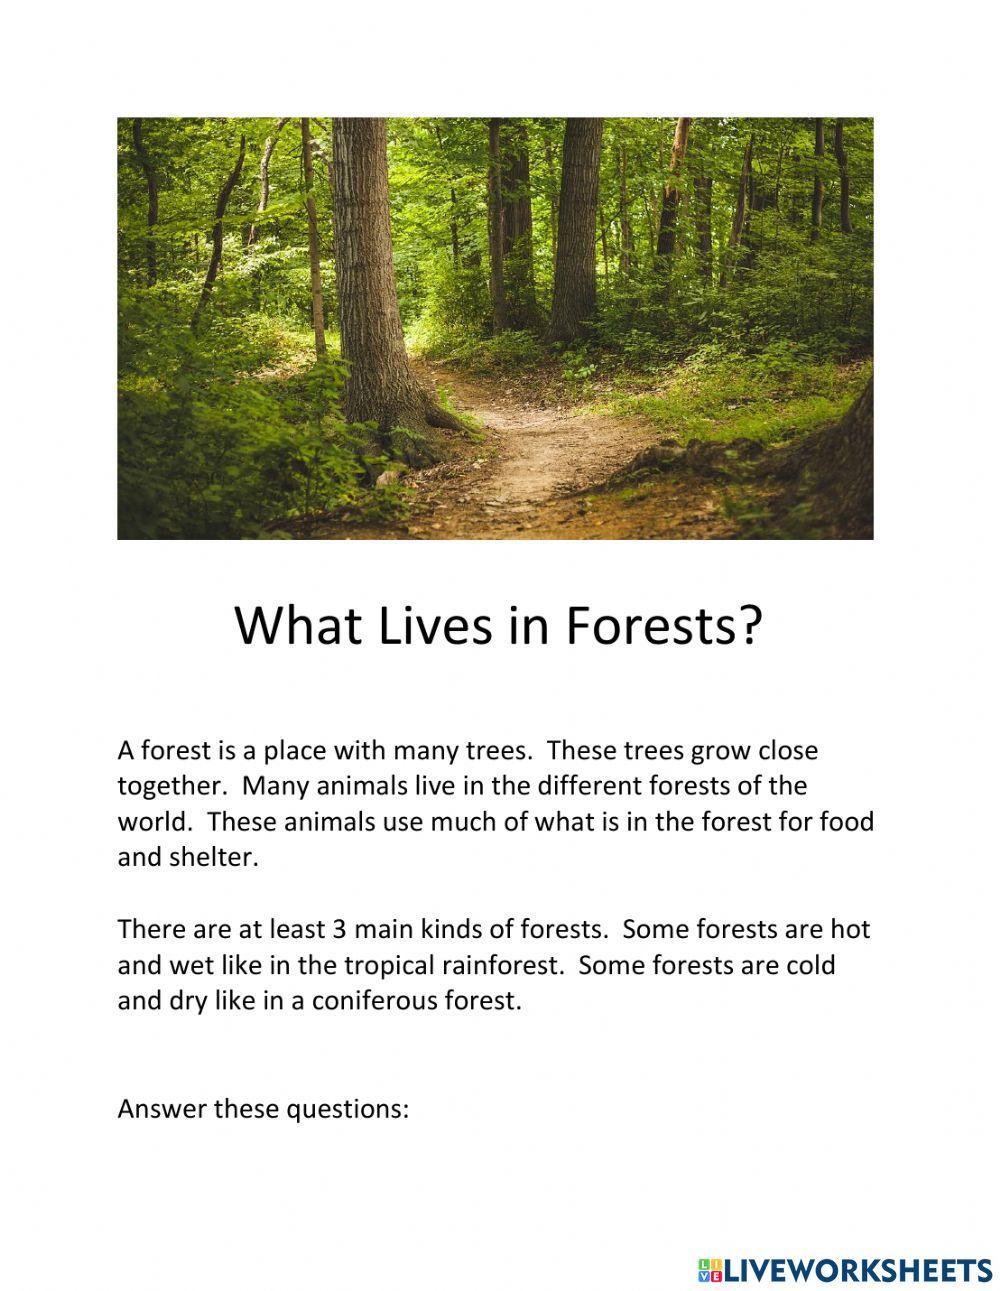 What Lives in the Forest?